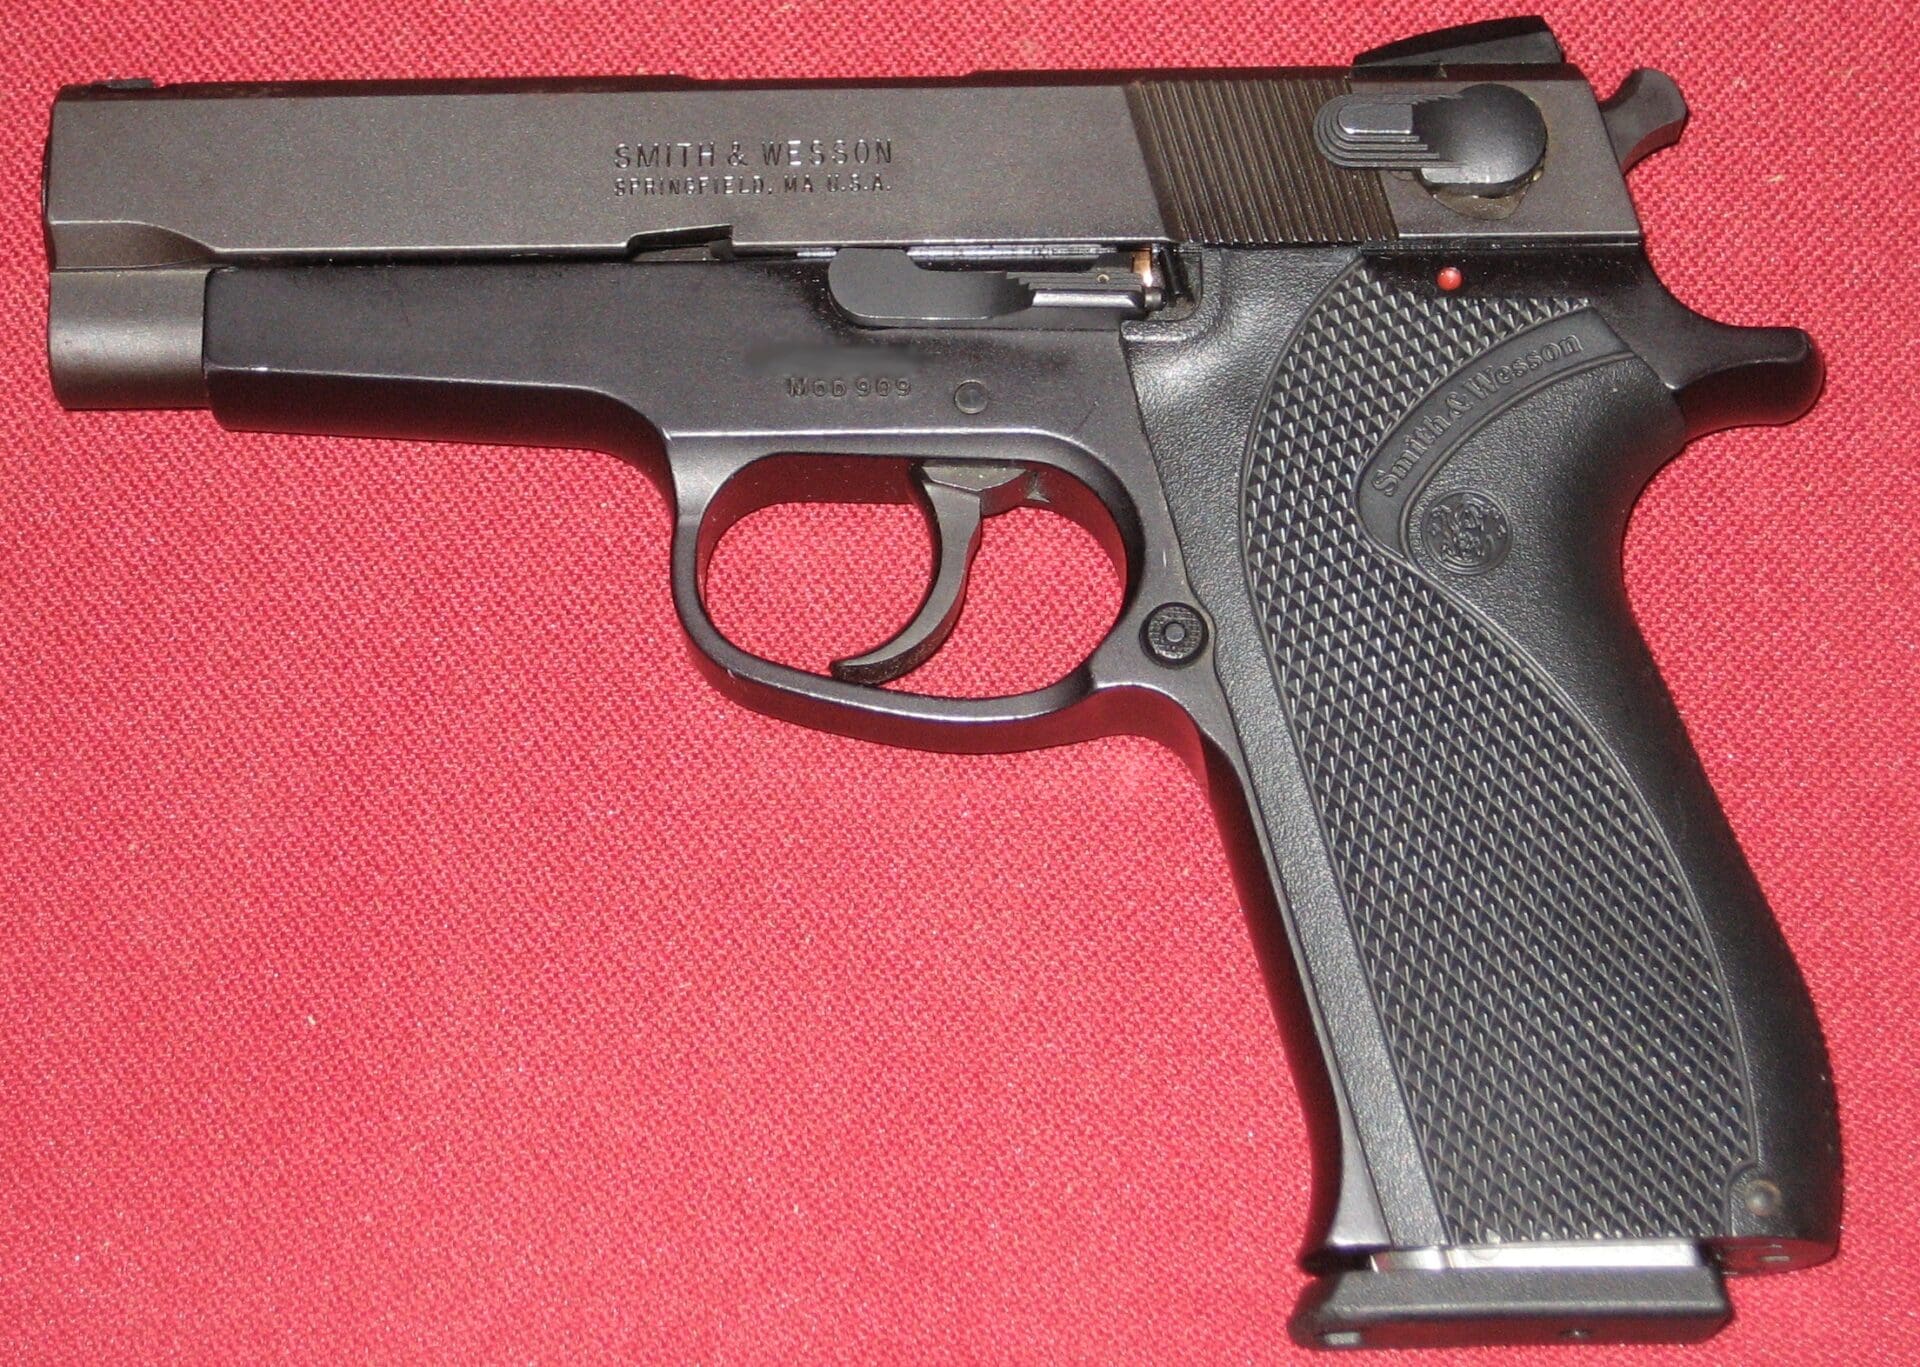 Smith & Wesson Model 915